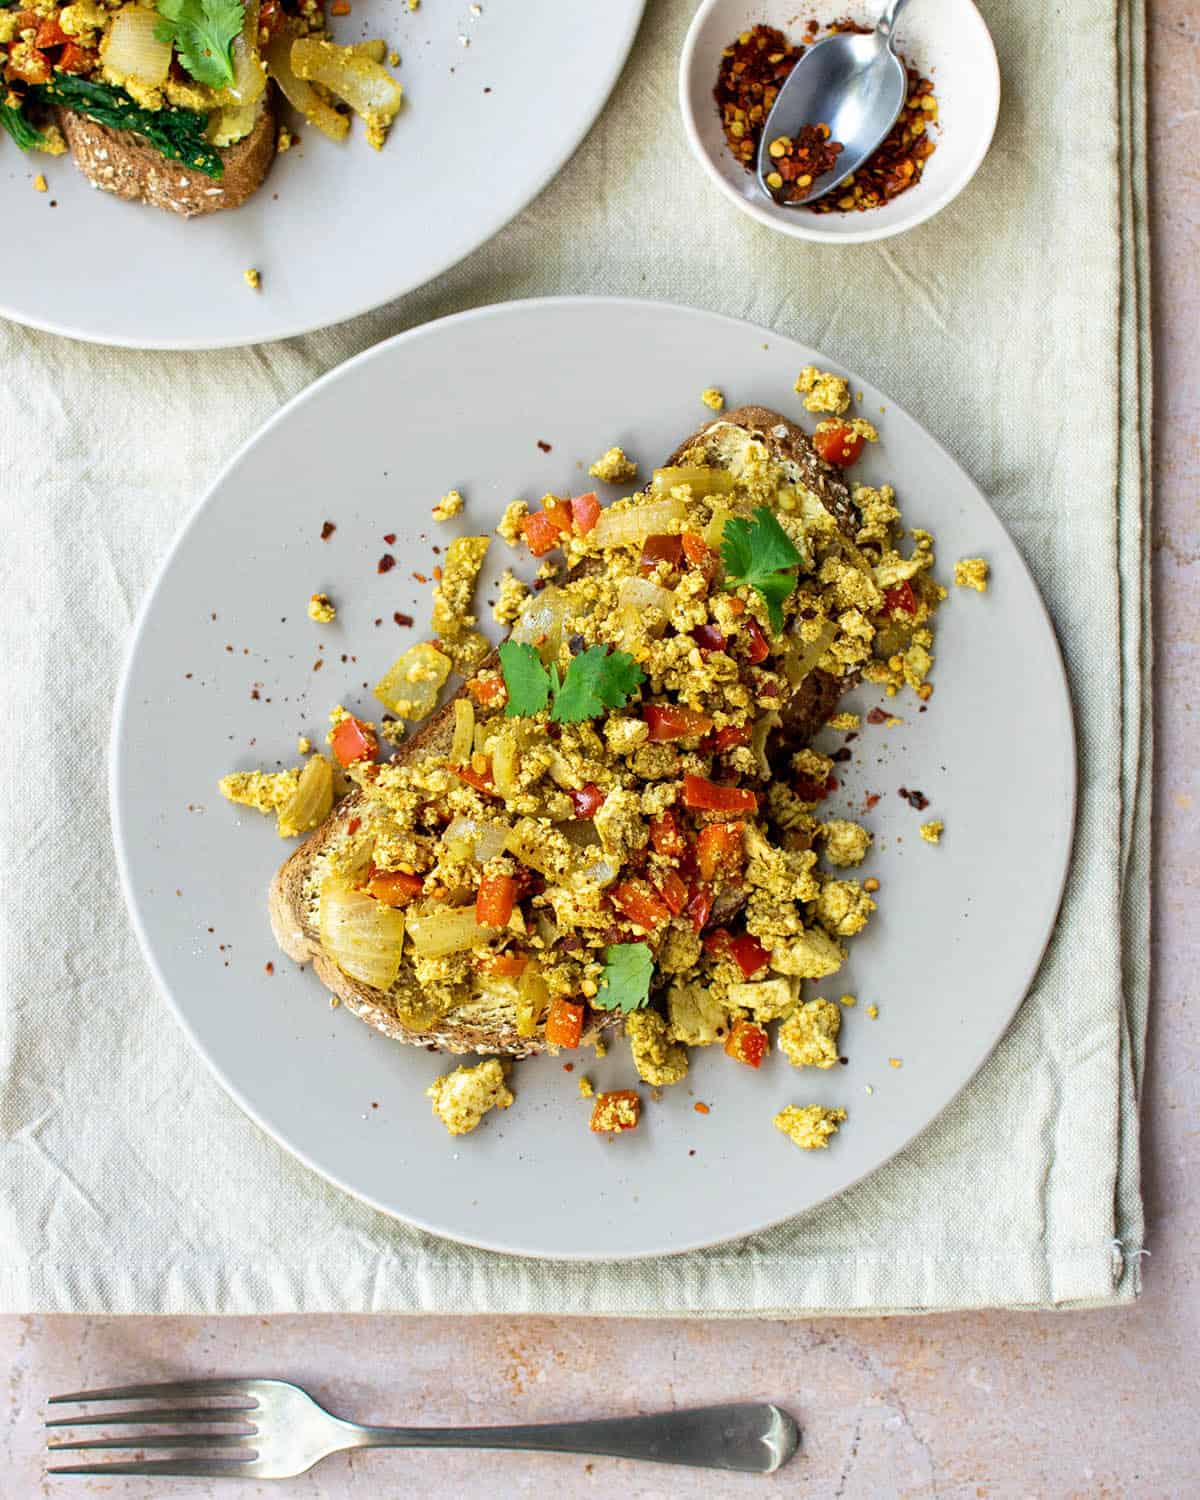 Curried tofu scramble on a piece of toast on a plate